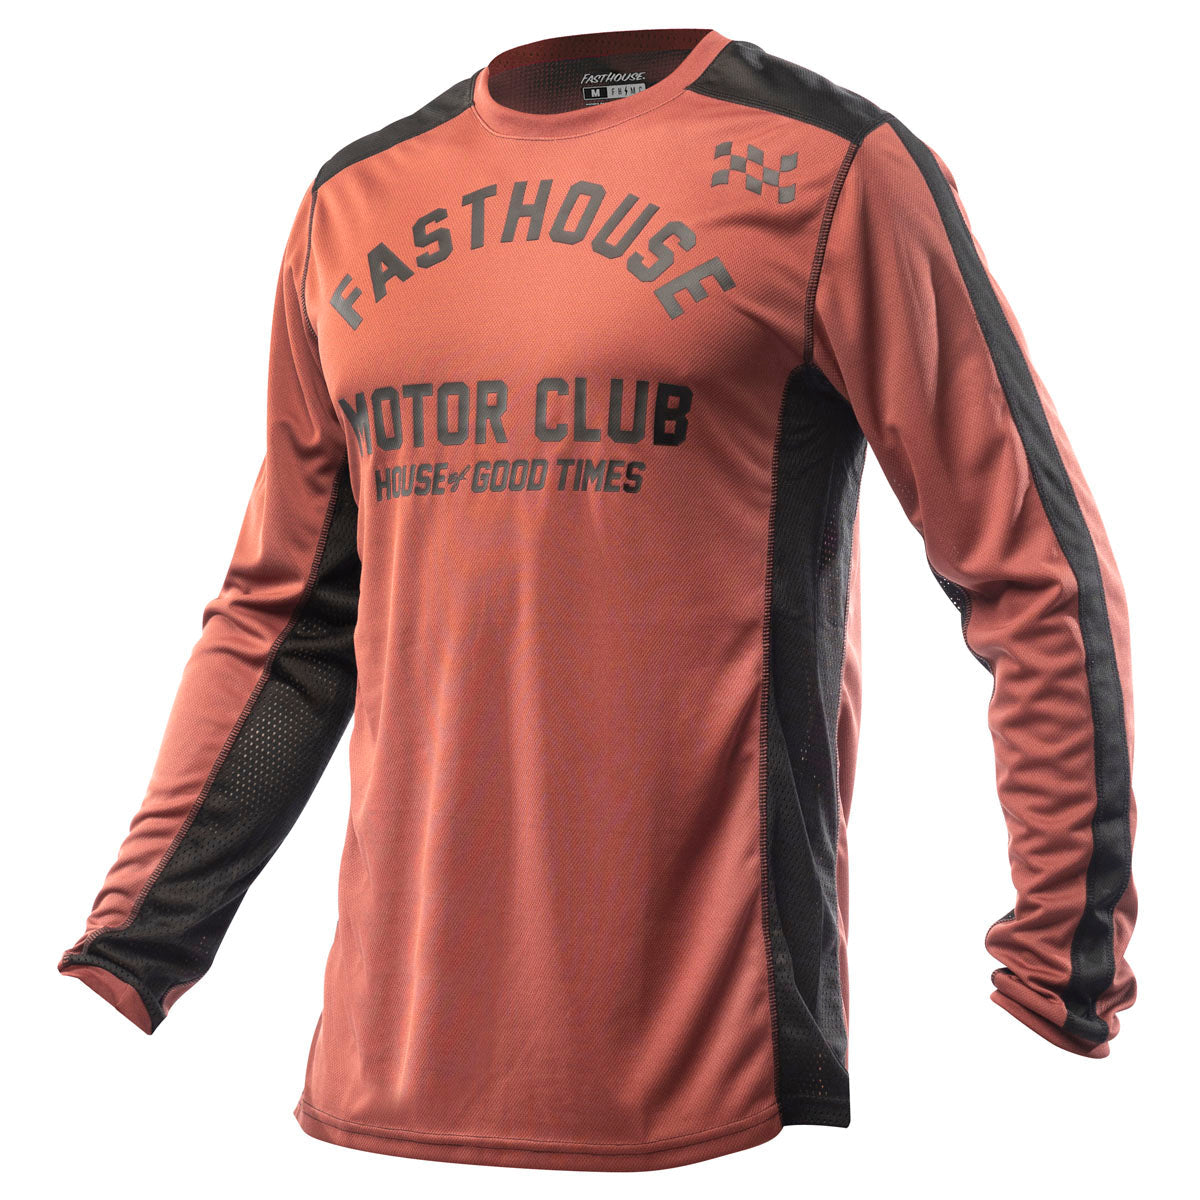 Fasthouse Grindhouse Sanguaro Jersey - RST